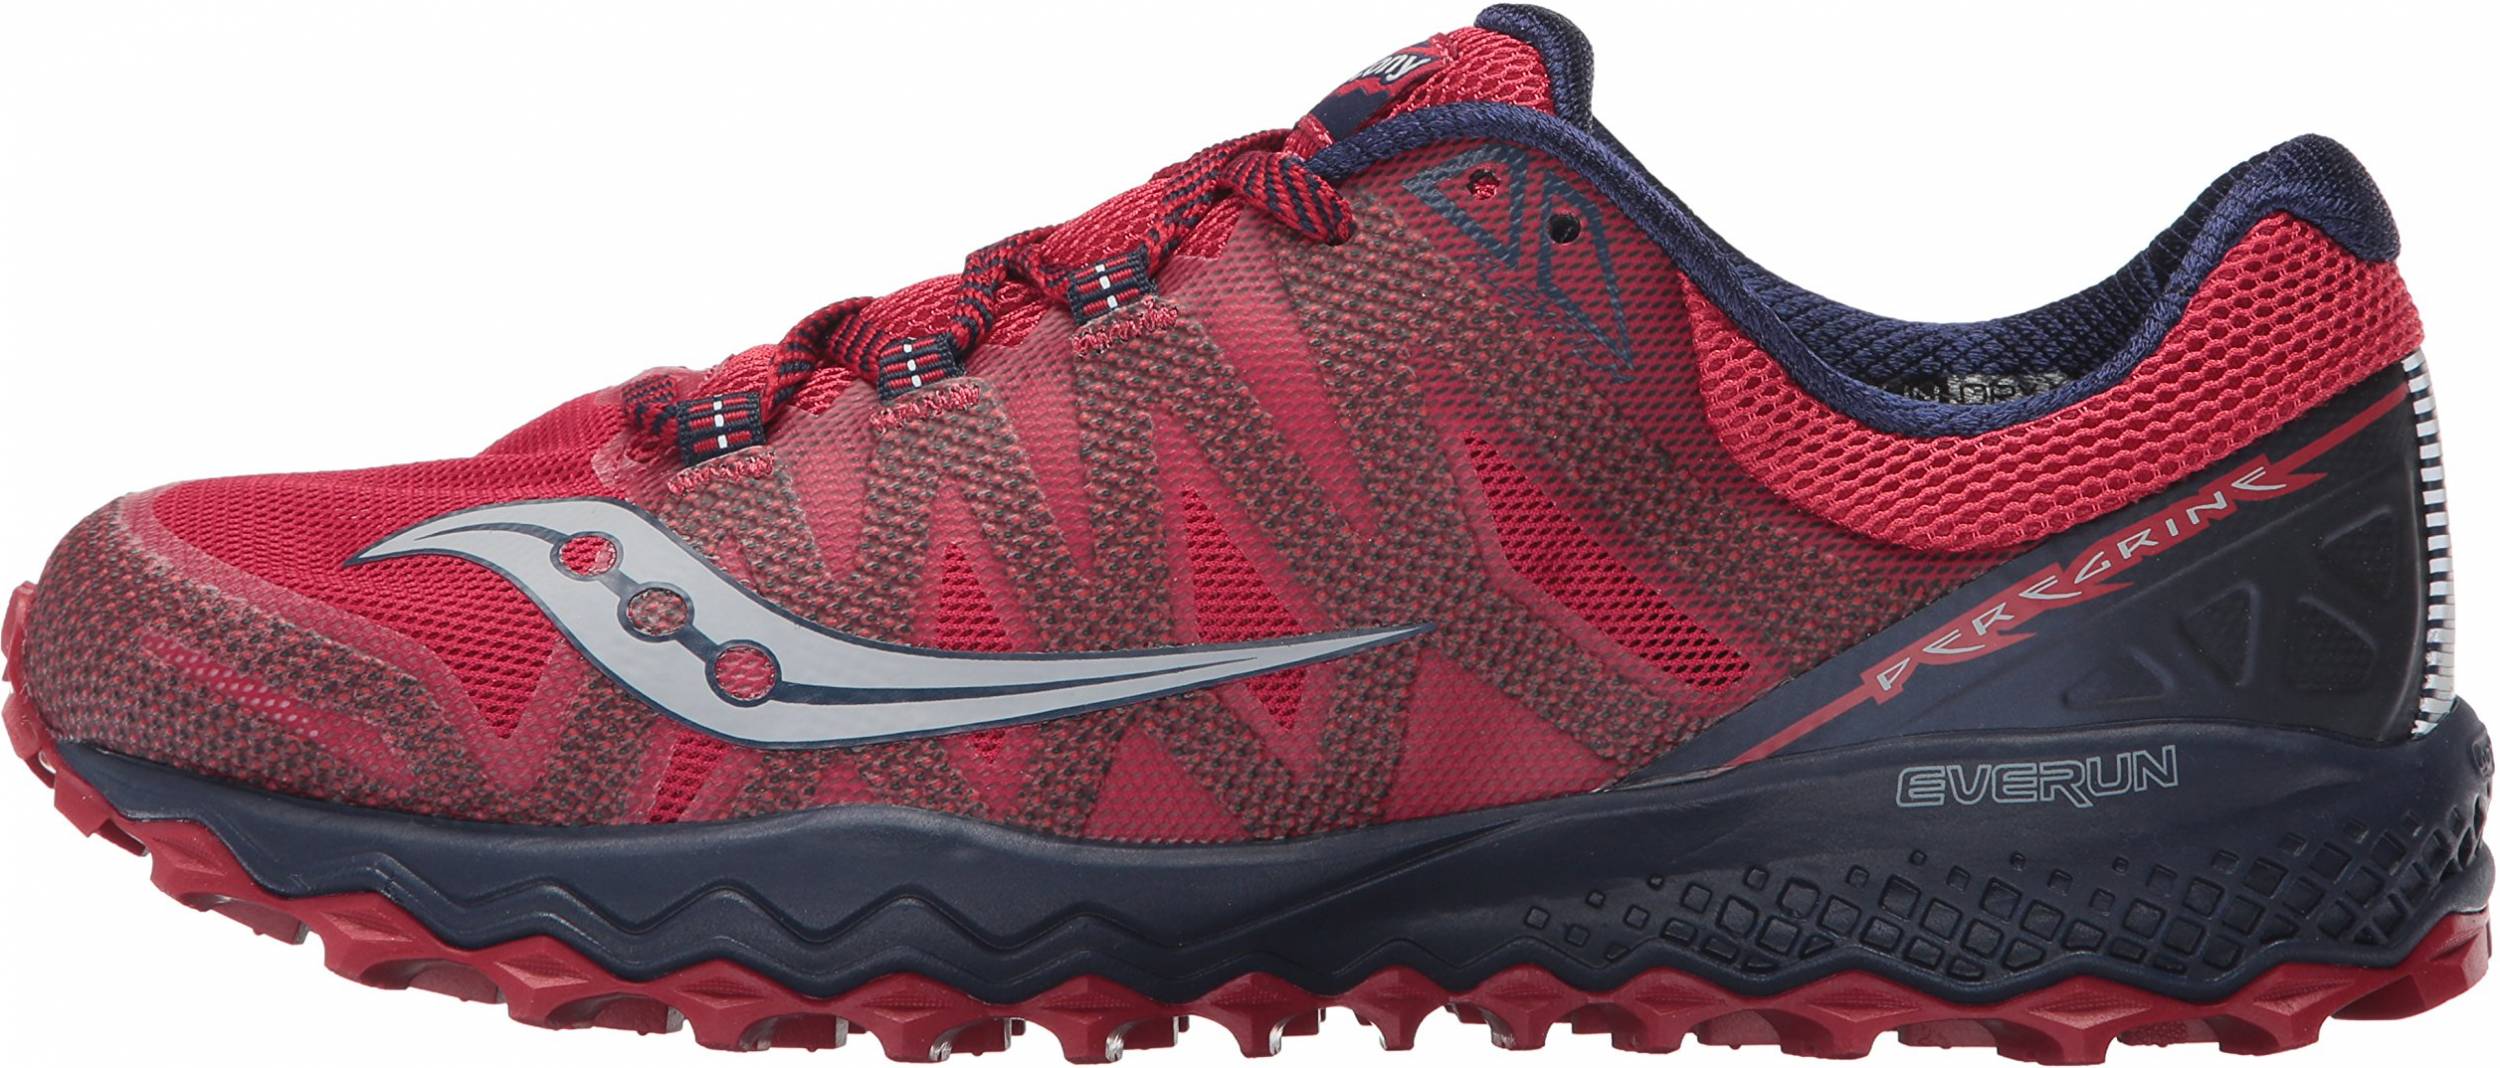 men's saucony trail running shoes